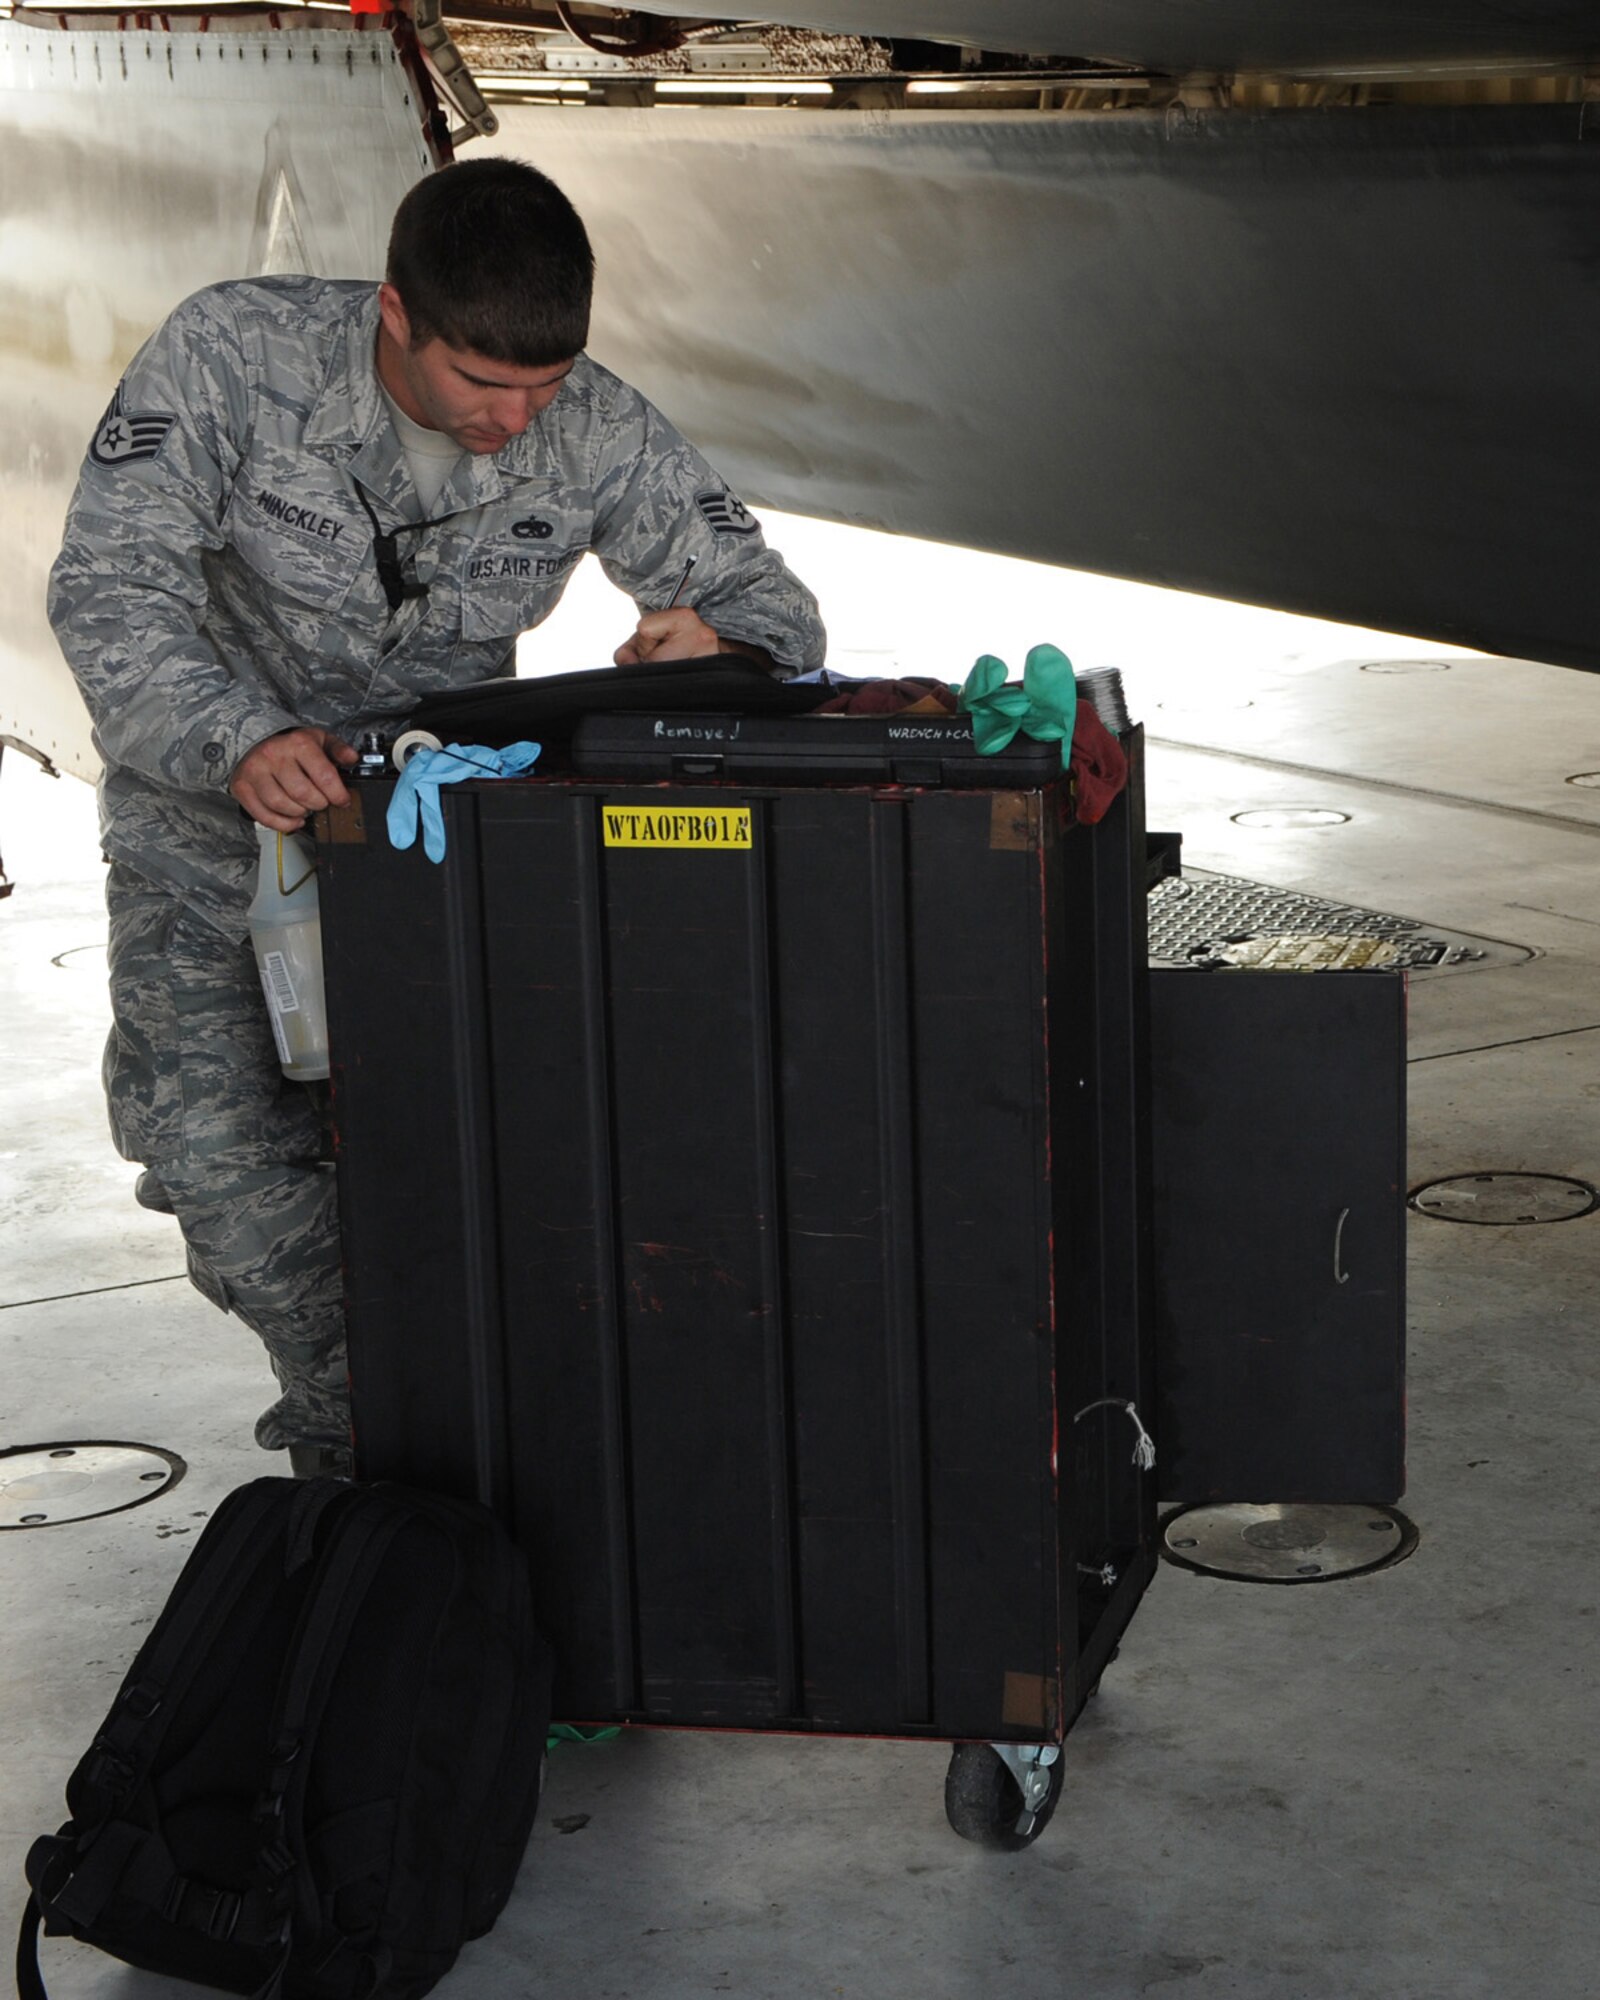 WHITEMAN AIR FORCE BASE, Mo. -  Staff Sgt. Eric Hinckley, 509th Aircraft Maintenance Squadron, completes paperwork on a filter element replacement, Sept. 3. The maintenance crew of this launch had to tackle this issue before the aircraft was allowed to launch. (U.S. Air Force Photo by Airman First Class Carlin Leslie)